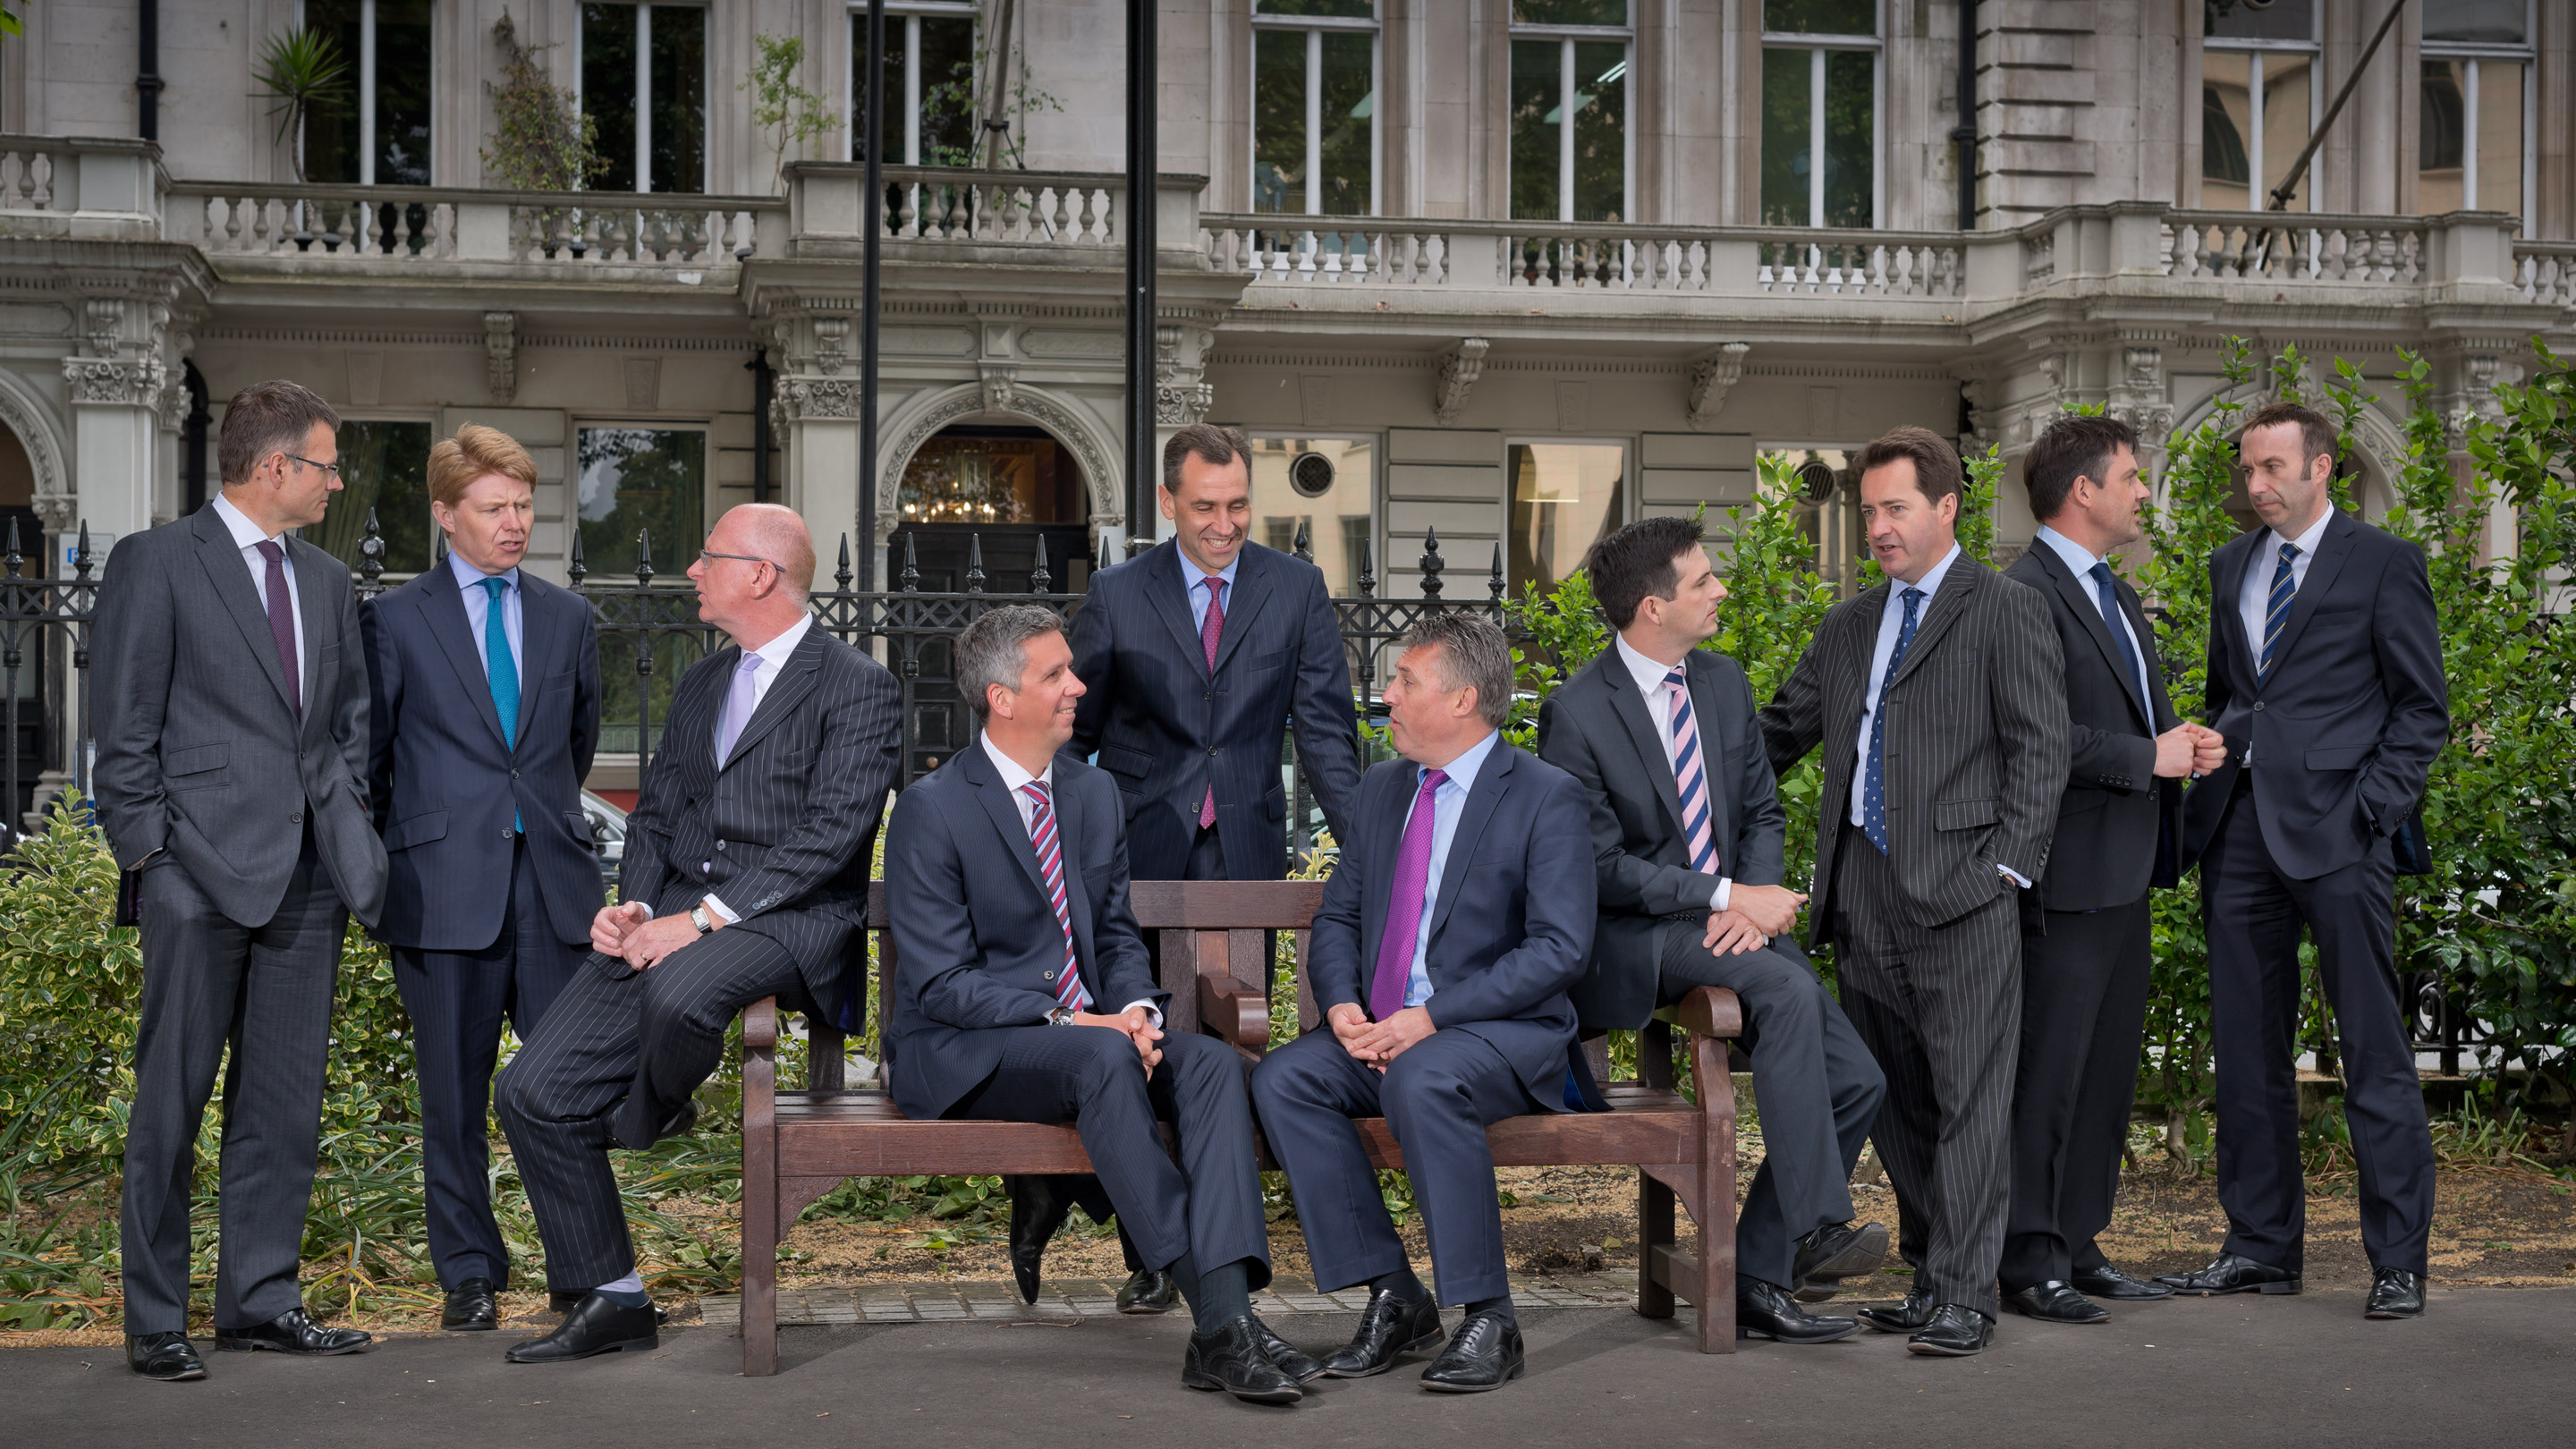 Corporate Portrait of group of business men